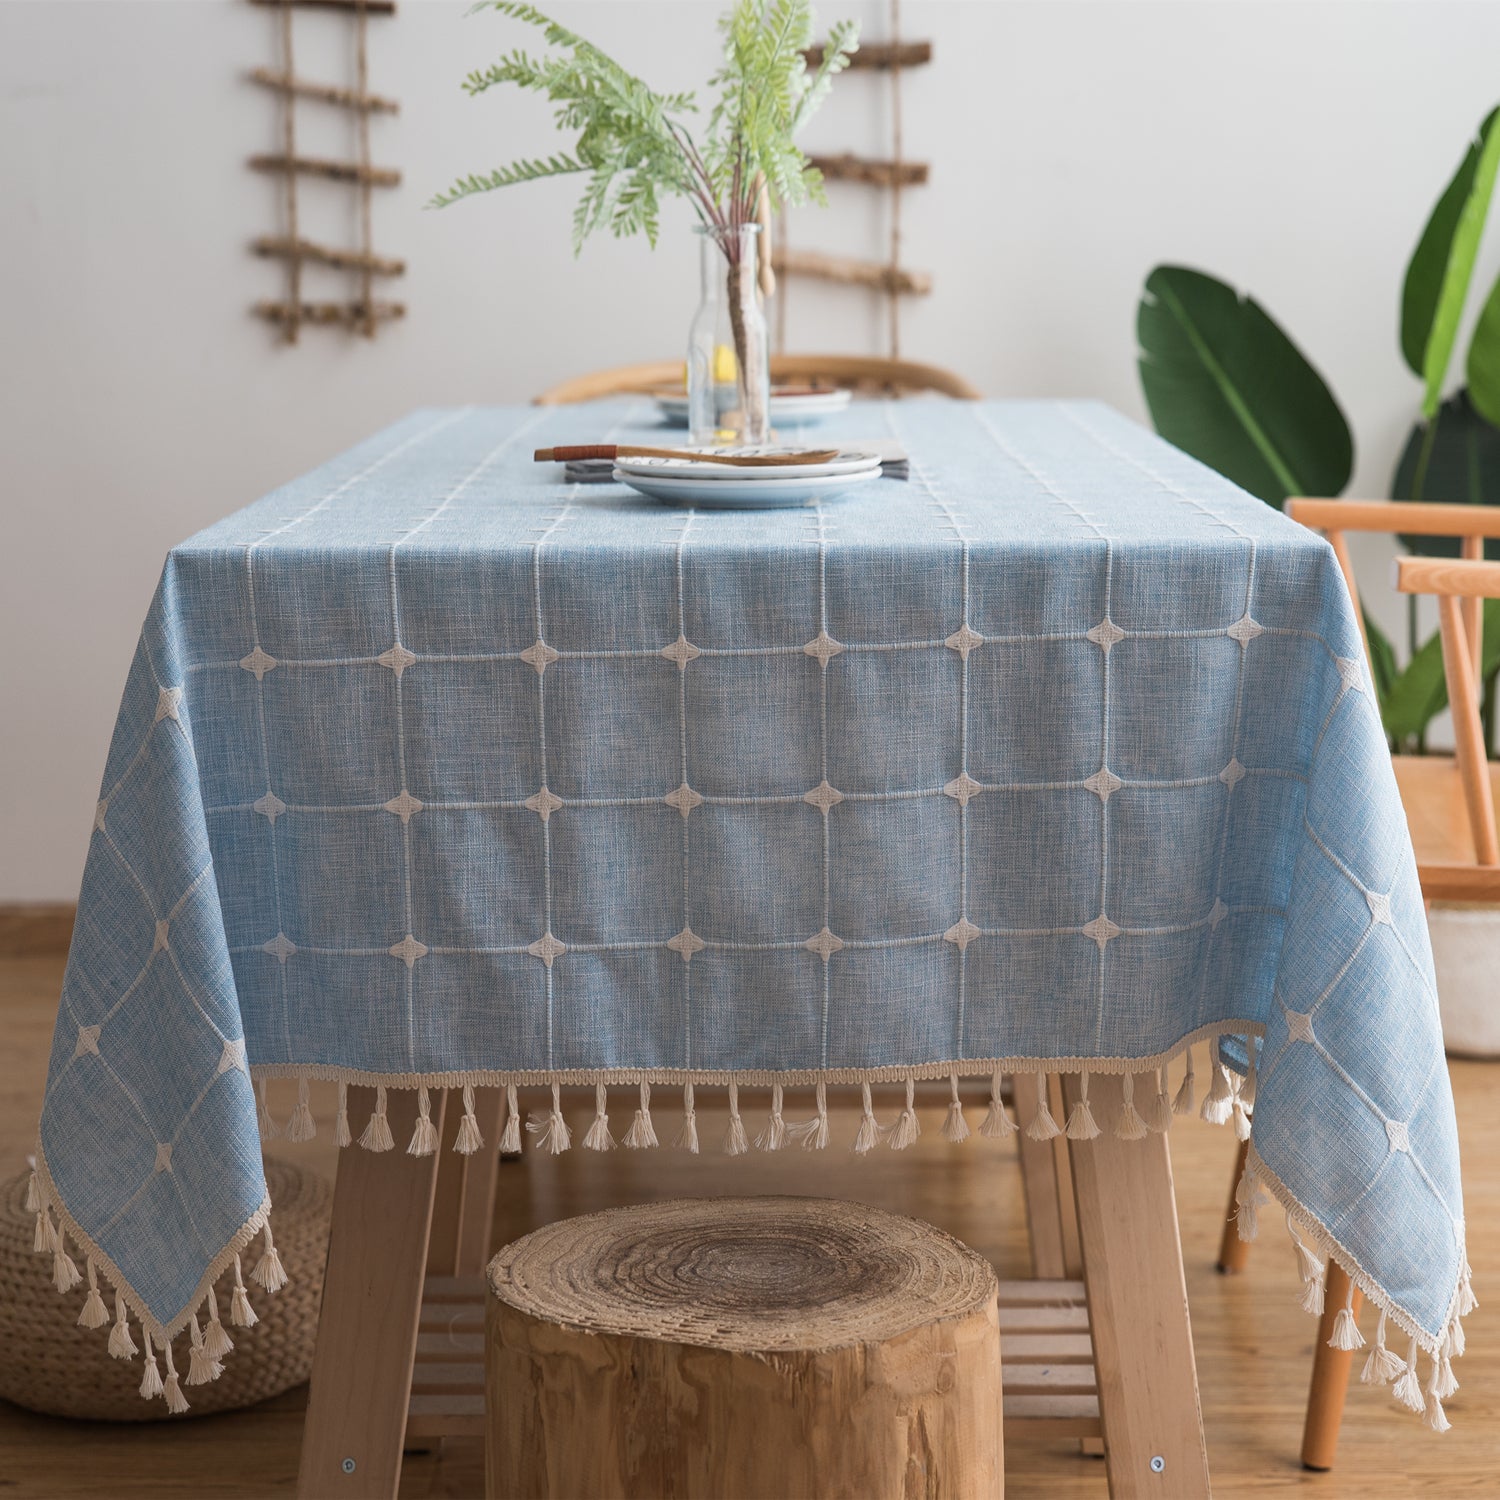 Cotton Linen Tablecloth with Embroidered Rectangular Japan Style